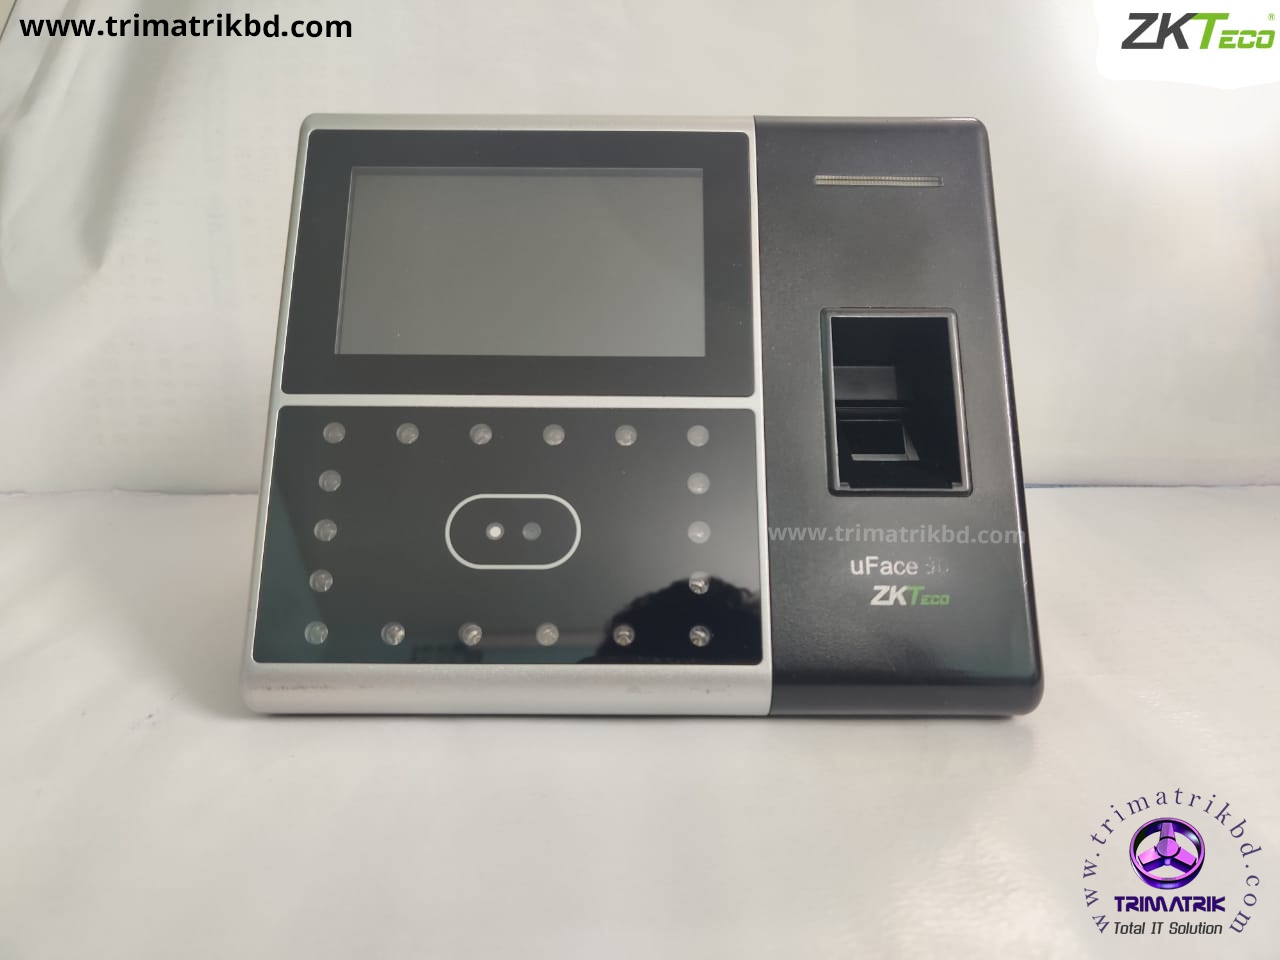 ZKTeco uFace 302 bd, Best Face detection time attendance terminal in bangladesh.